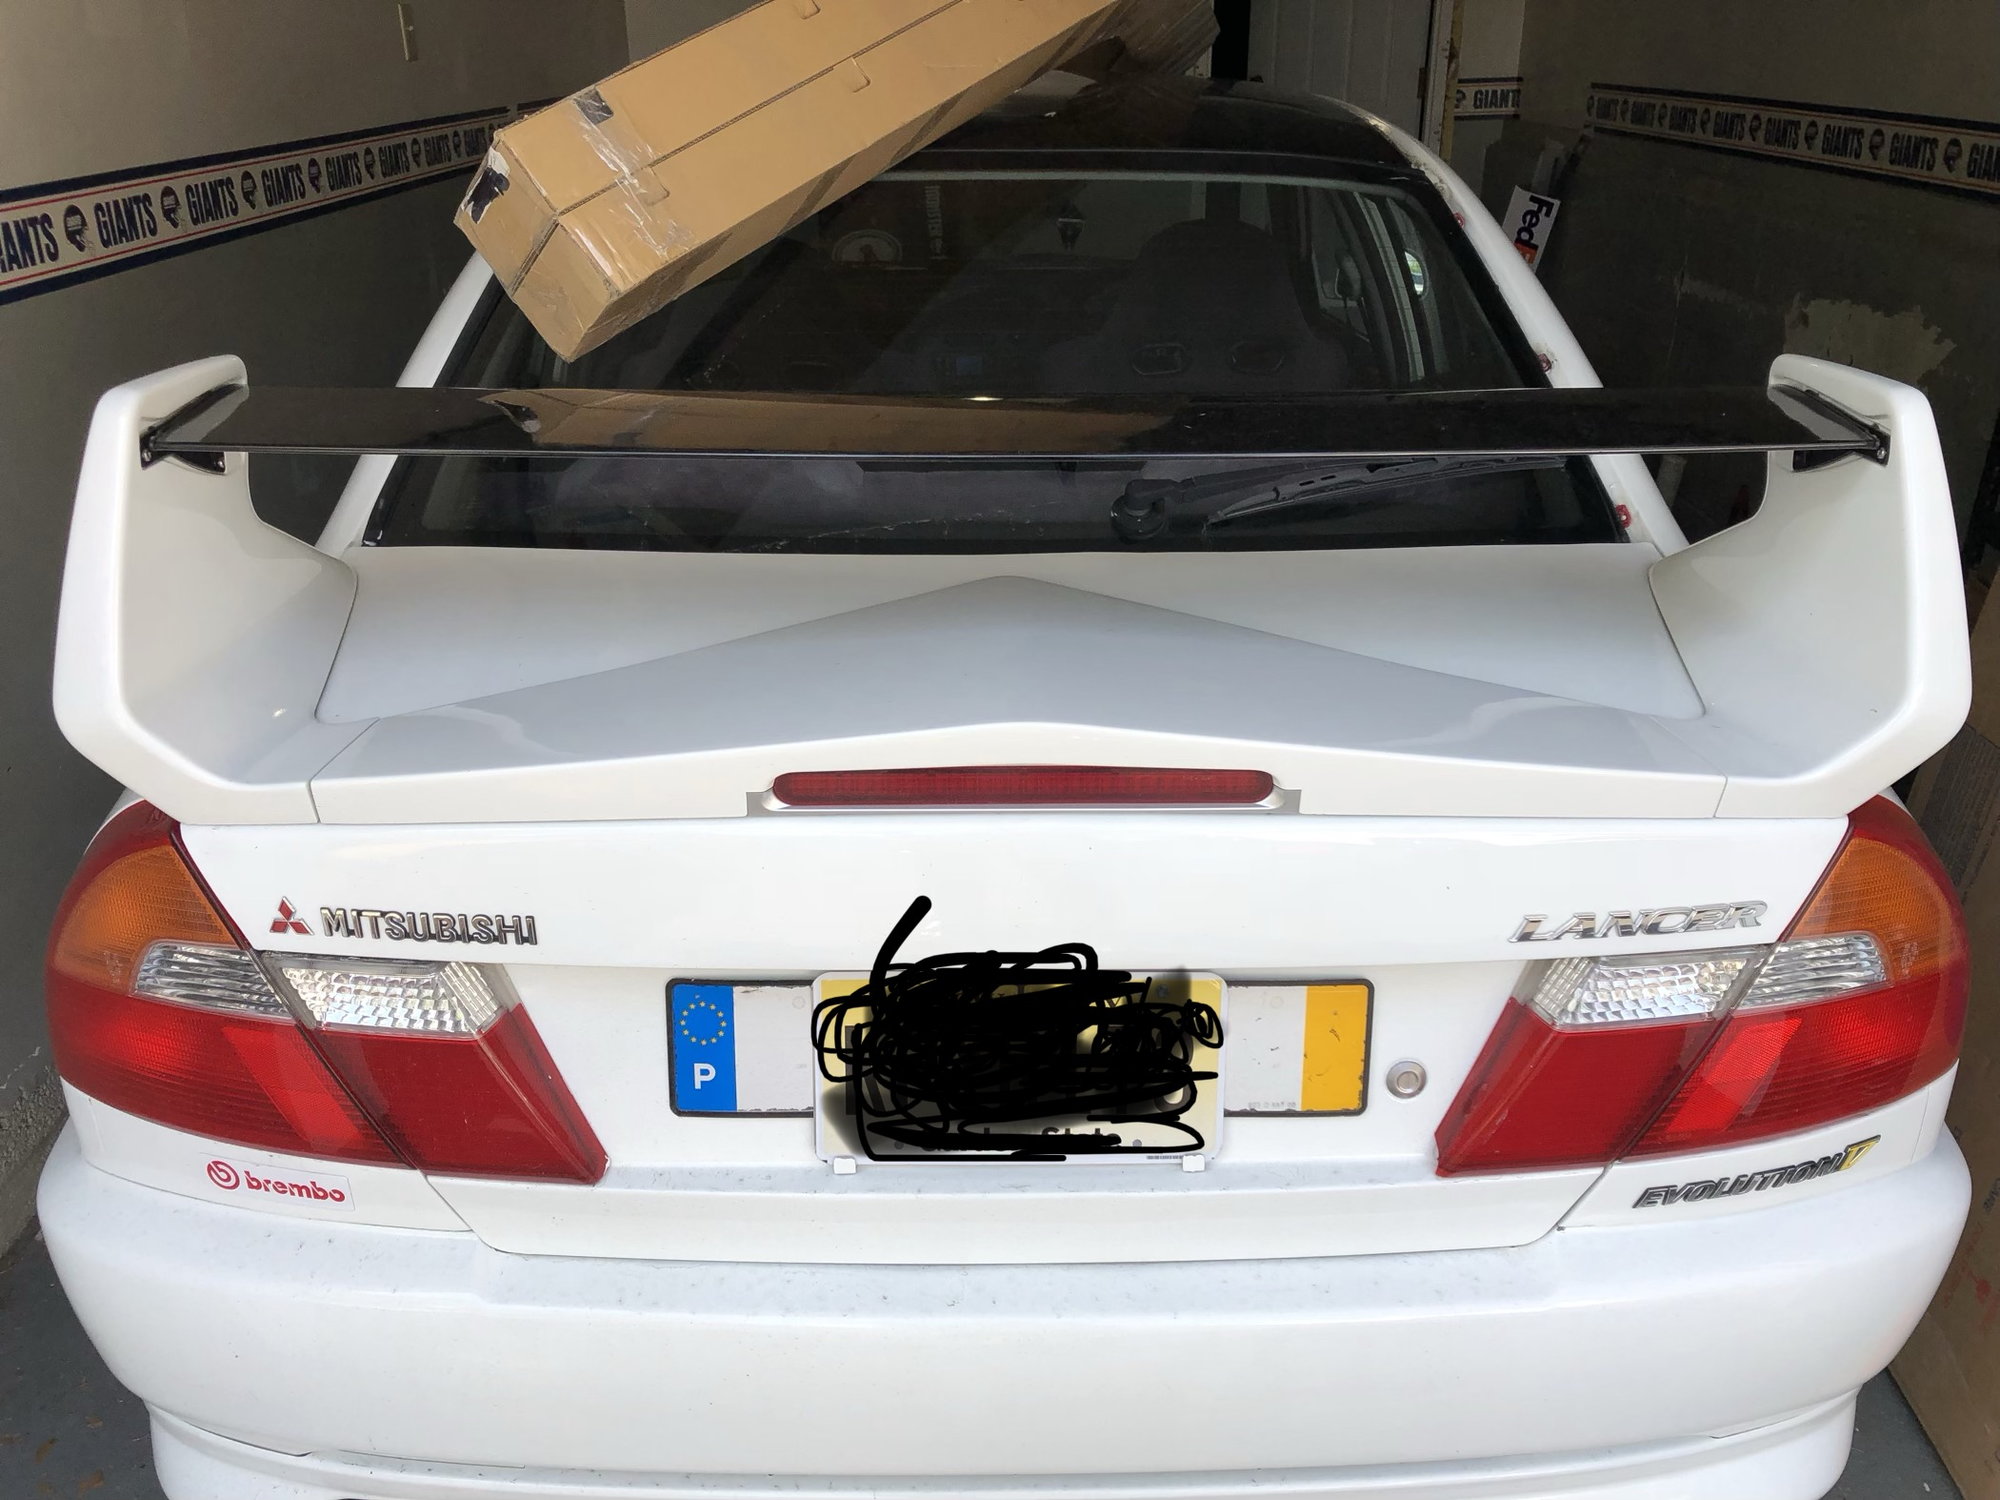 Exterior Body Parts - Authentic Evo 5 Wing/Spoiler - Used - Linden, NJ 07036, United States